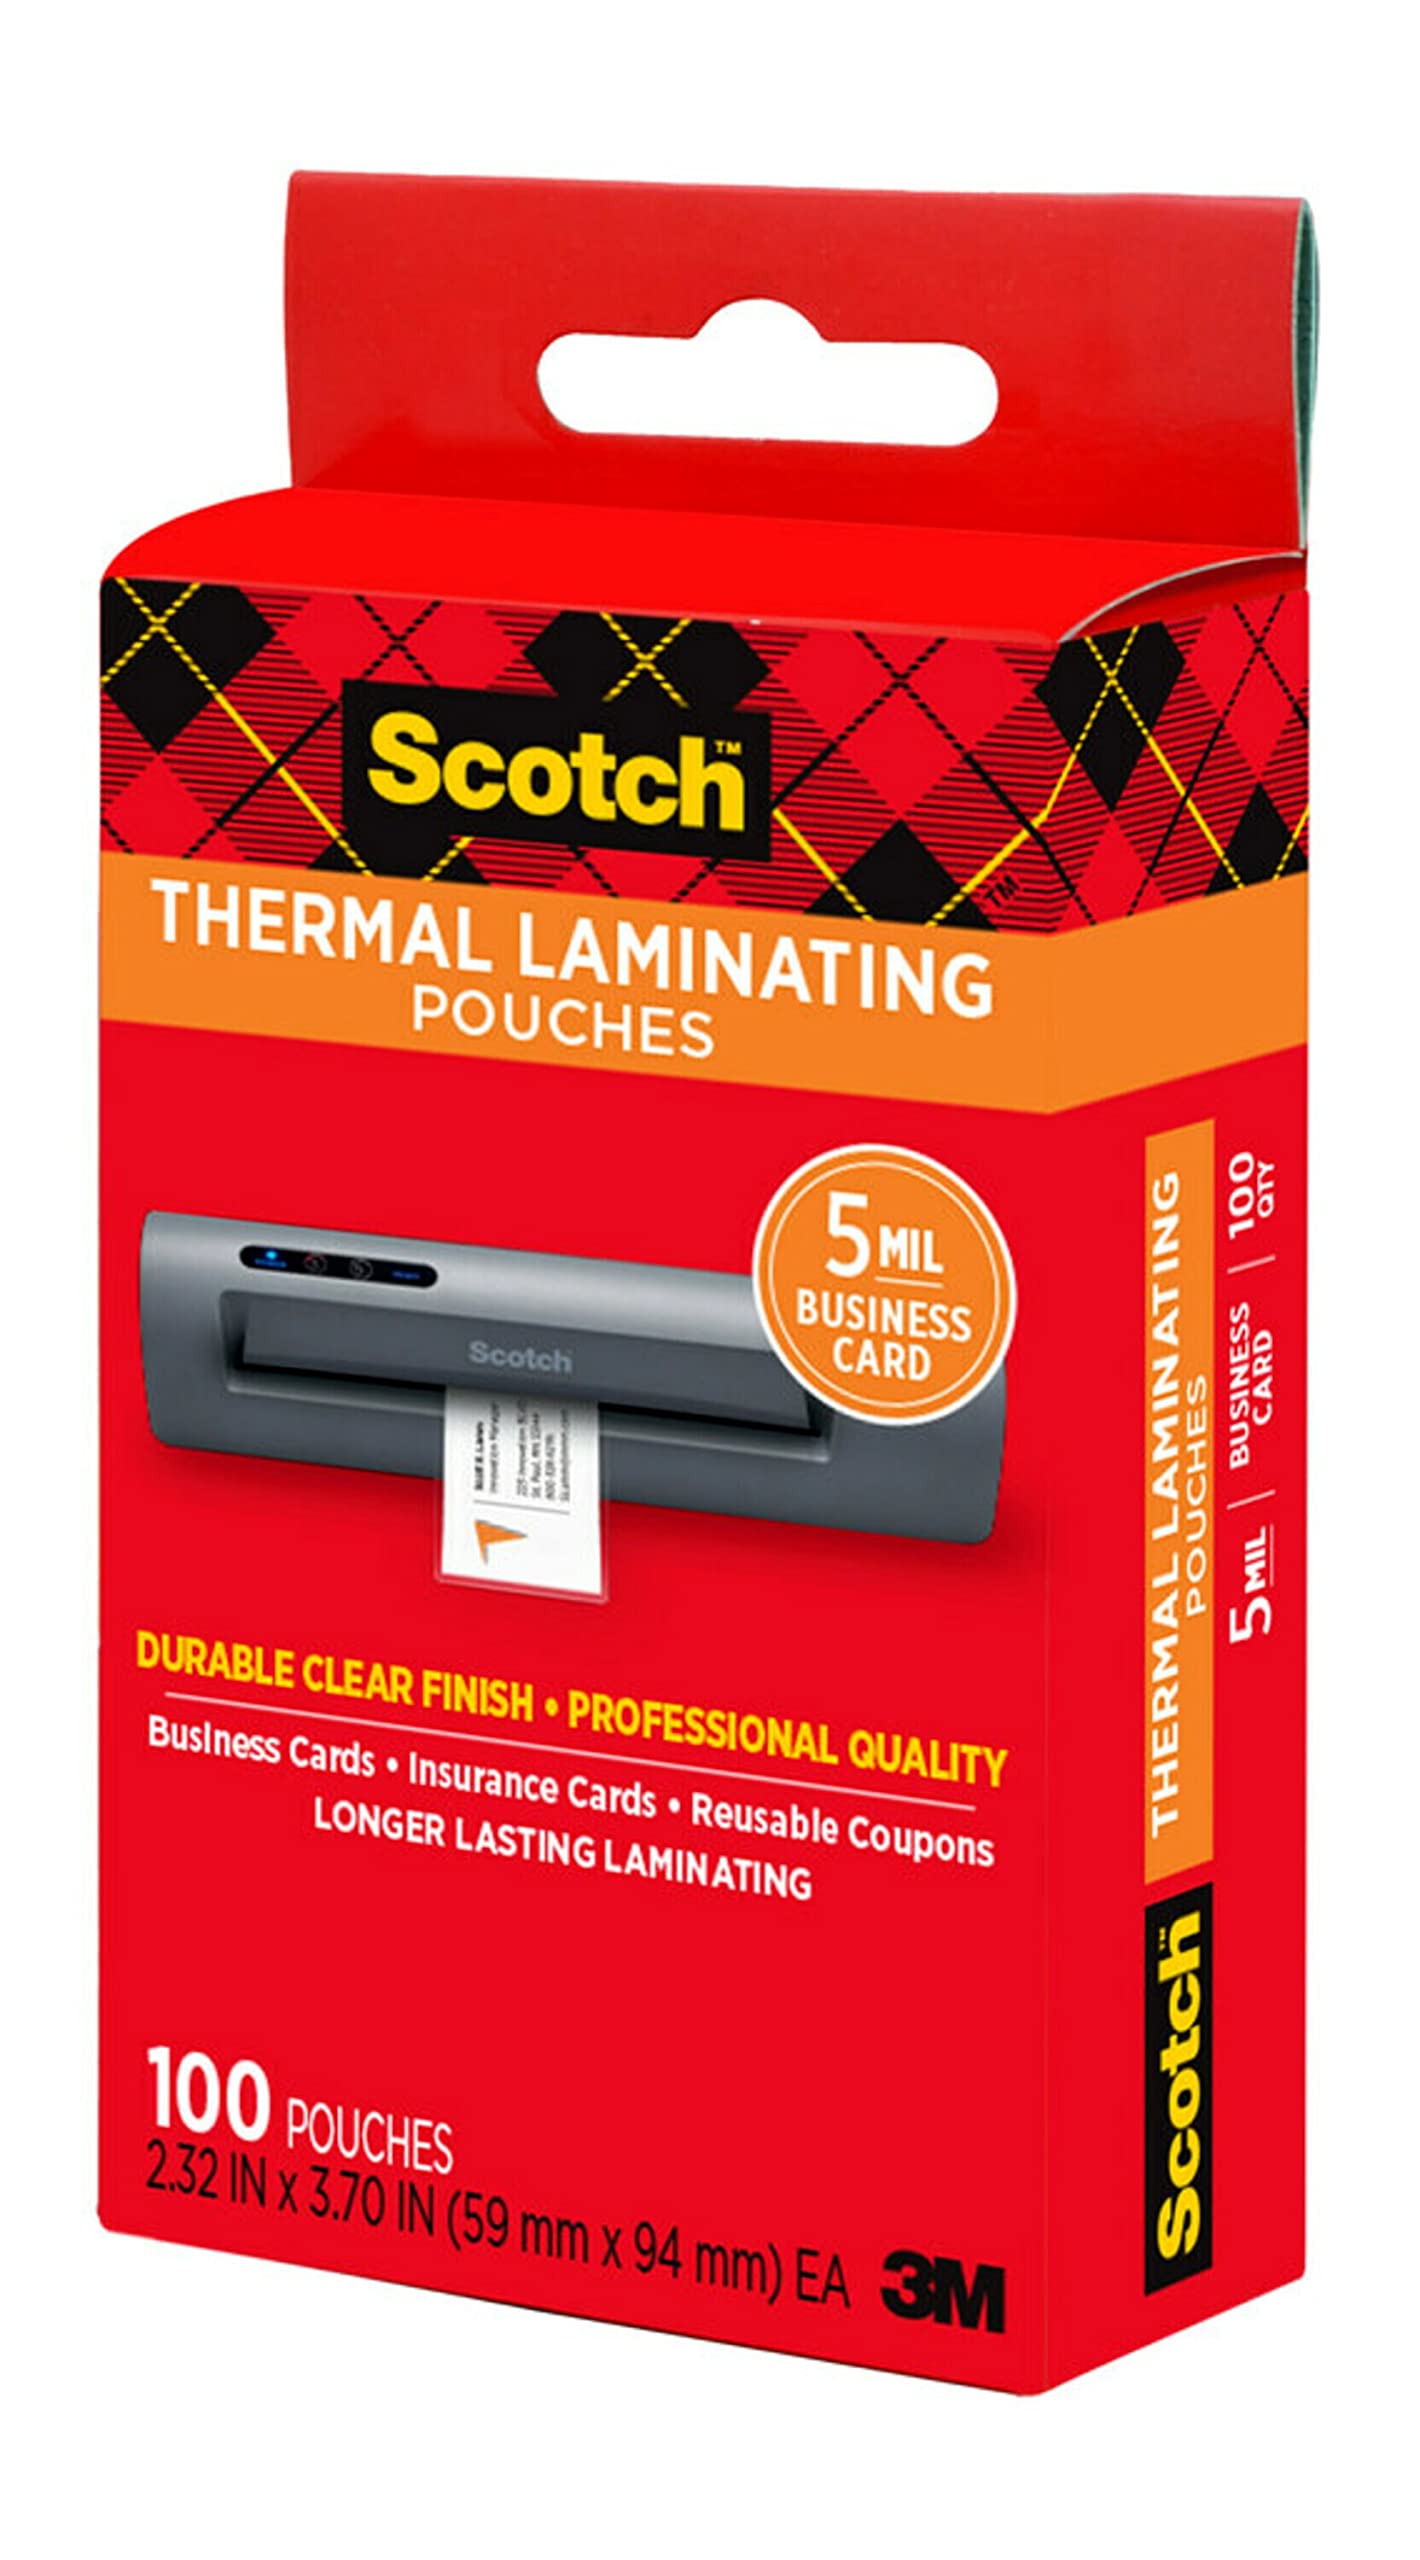 Scotch Thermal Laminating Pouches, 5 Mil Thick for Extra Protection, 2.32 x 3.70-Inches, Business Card Size, 100-Pack (TP5851-100)